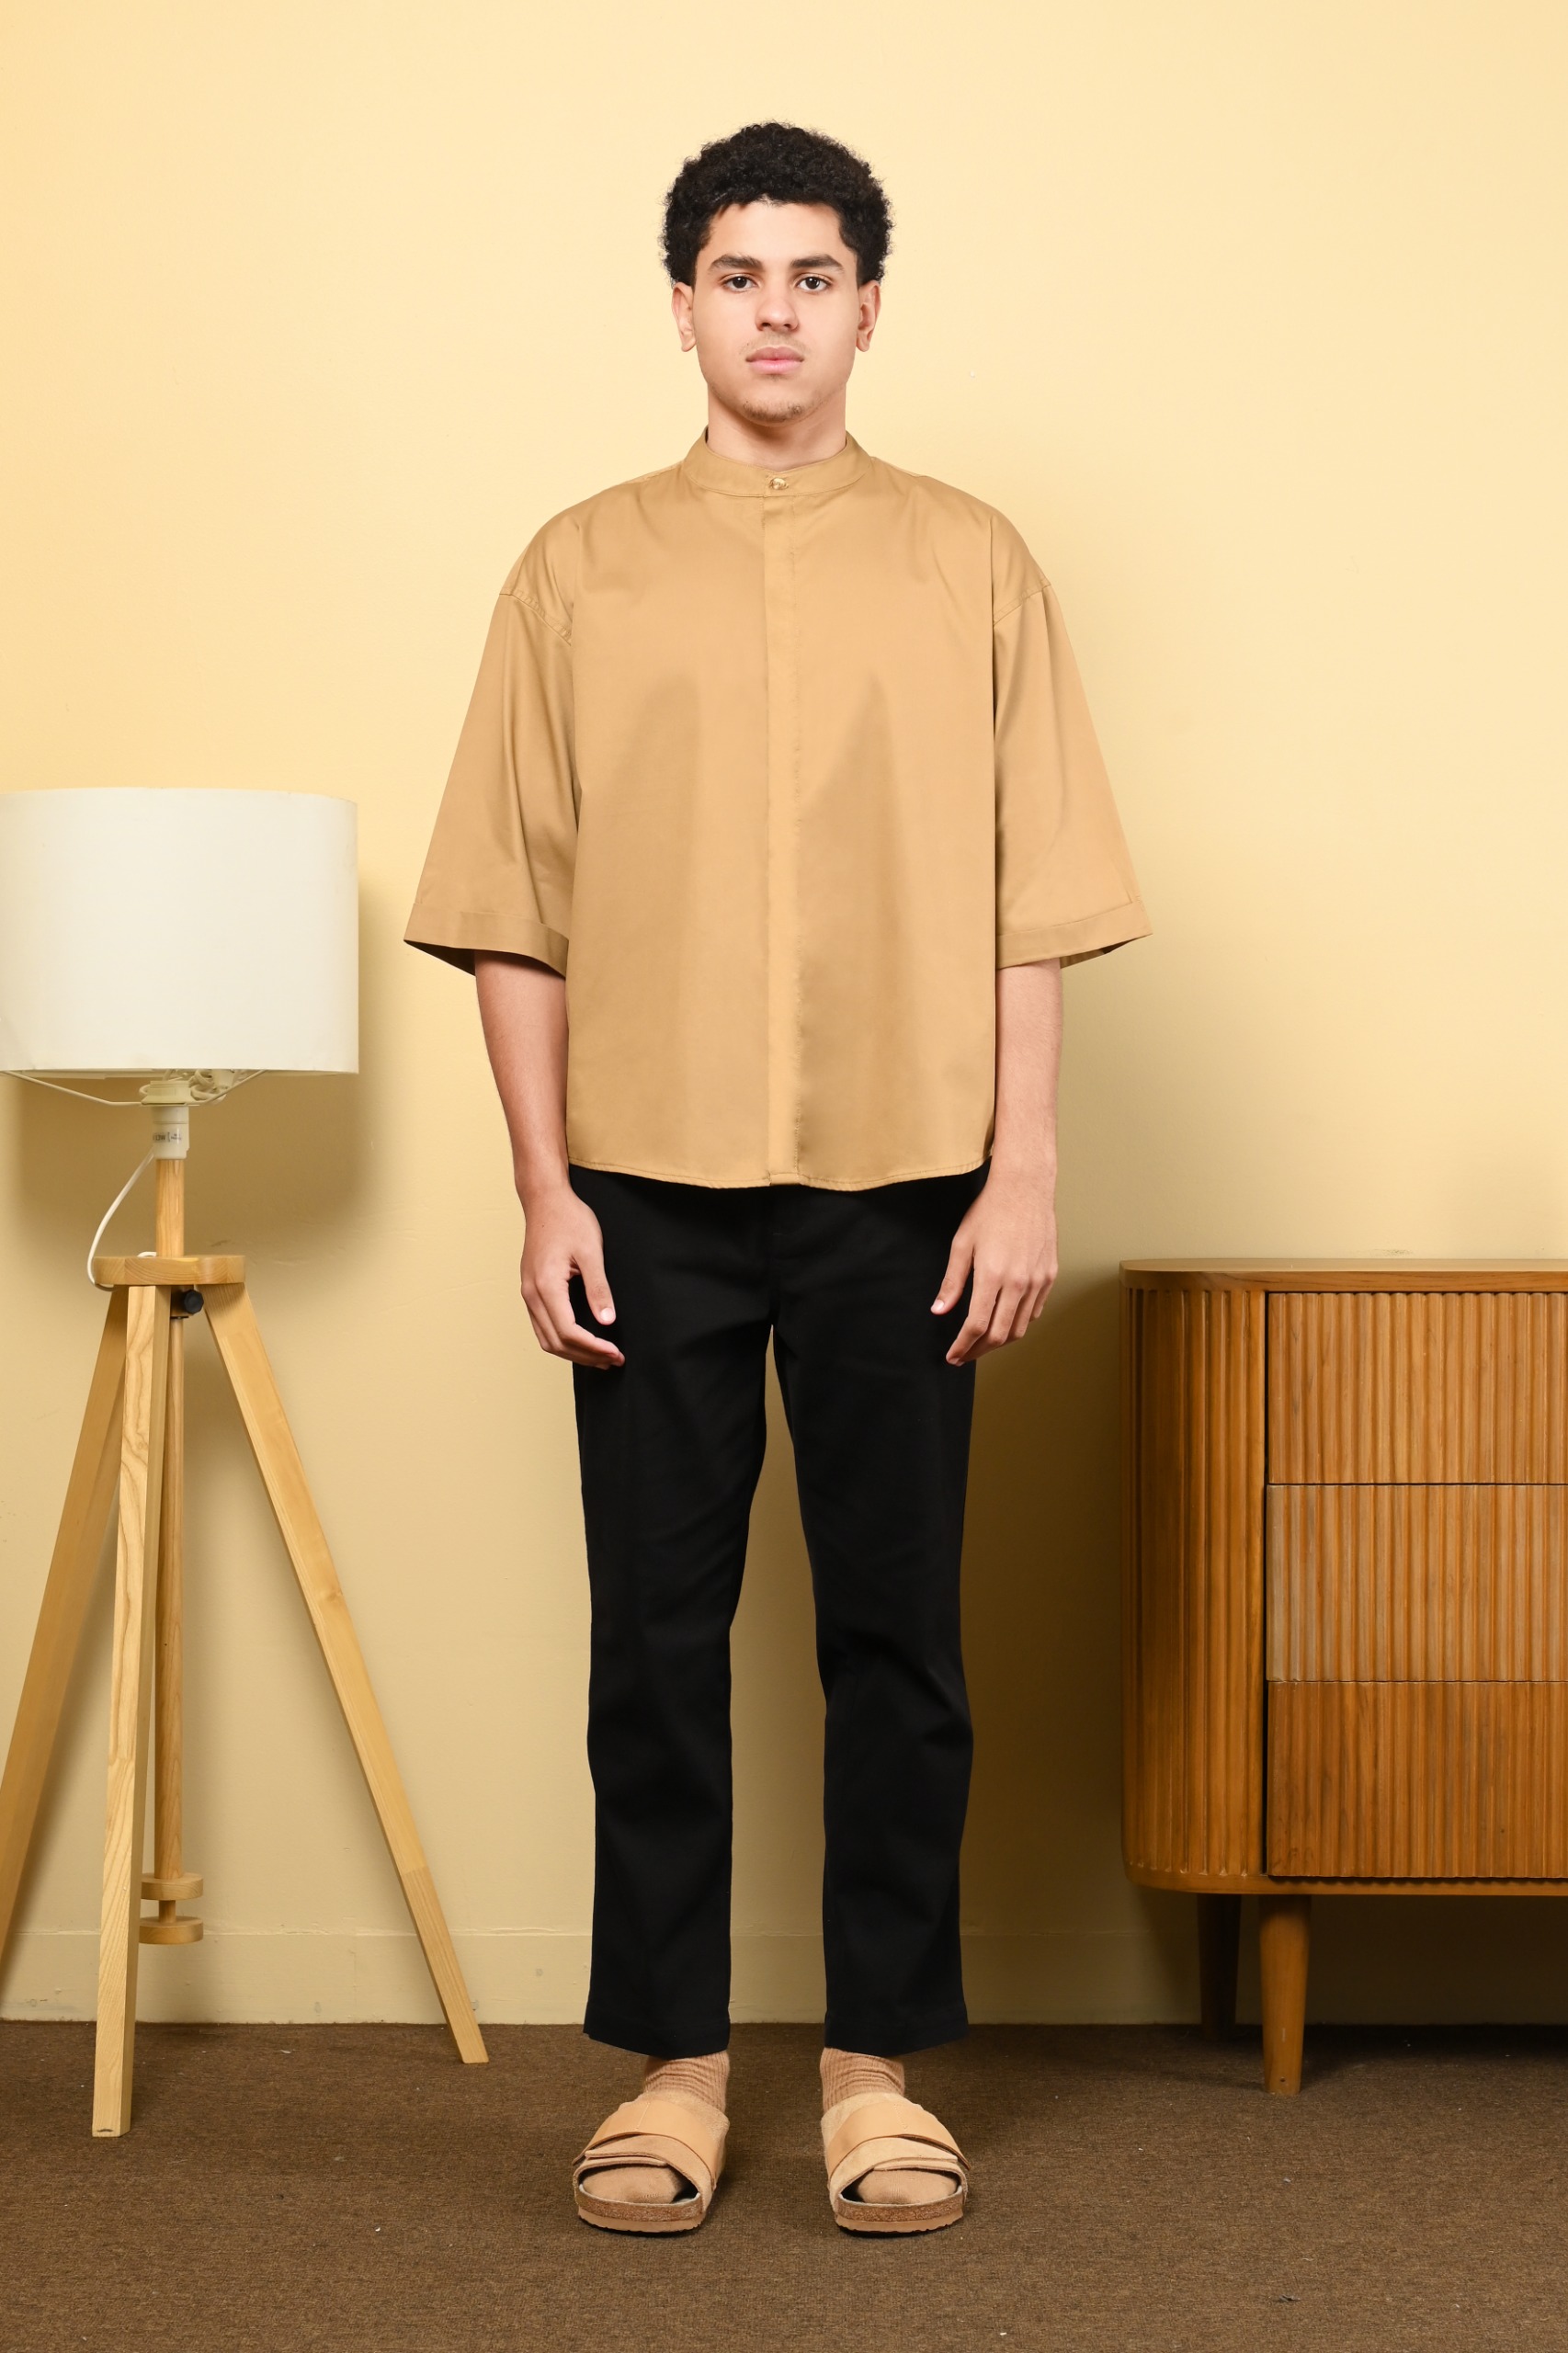 A Woman Wearing a Beige Shirt and Black Pants · Free Stock Photo